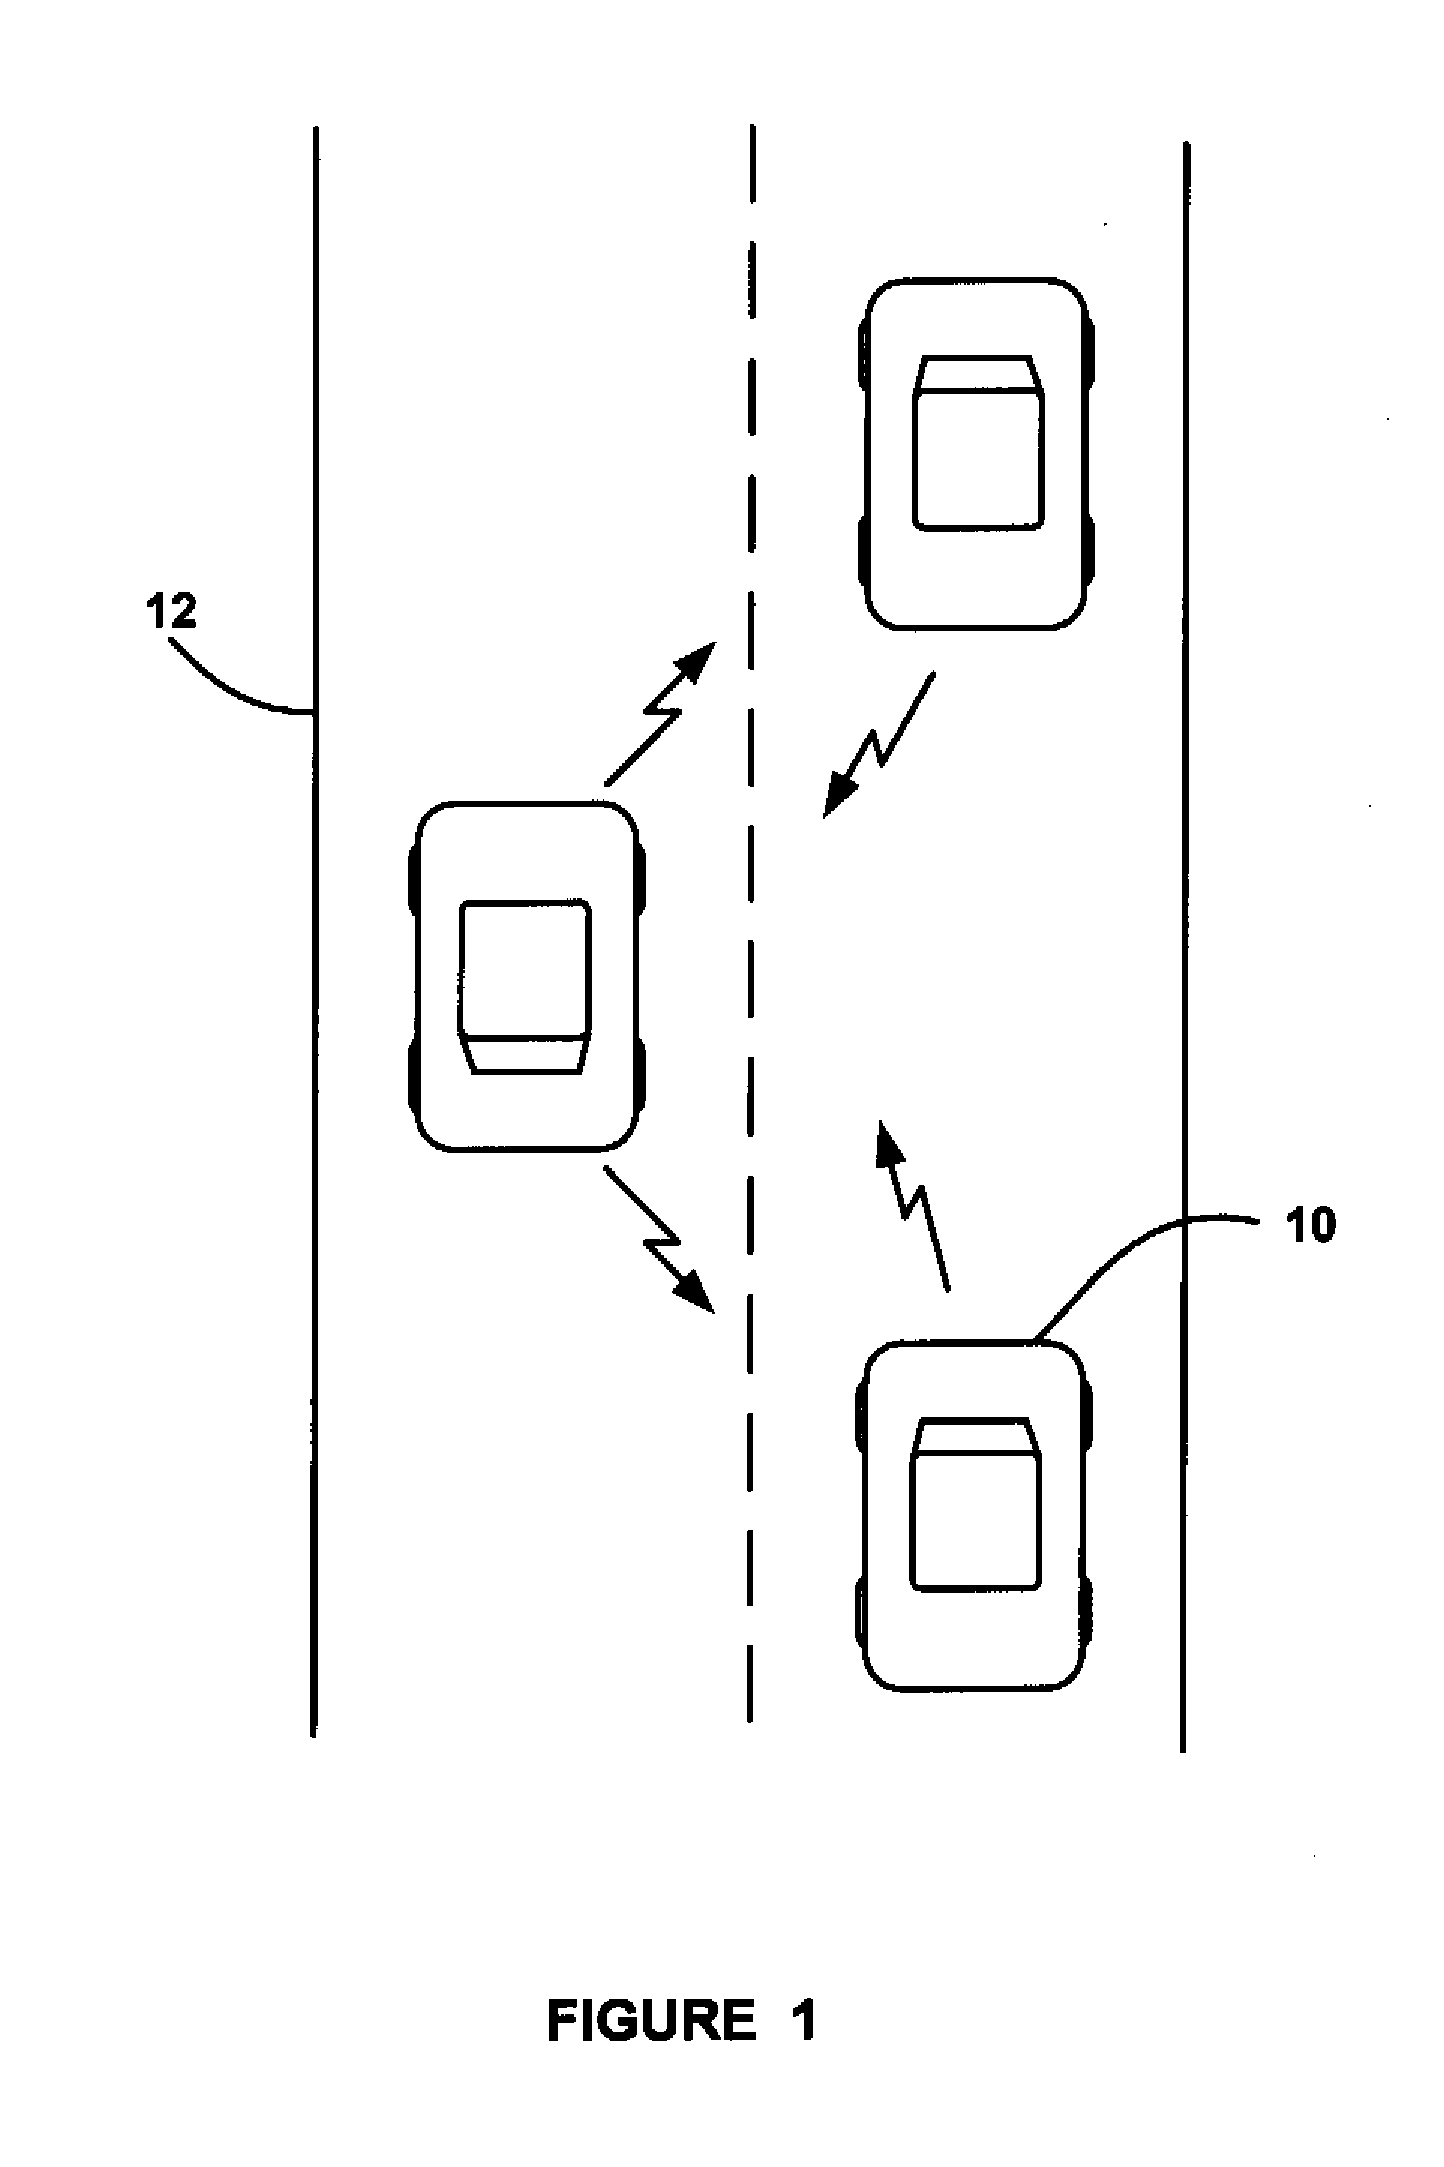 Method for Protecting Deployed Assets in a Cooperative System